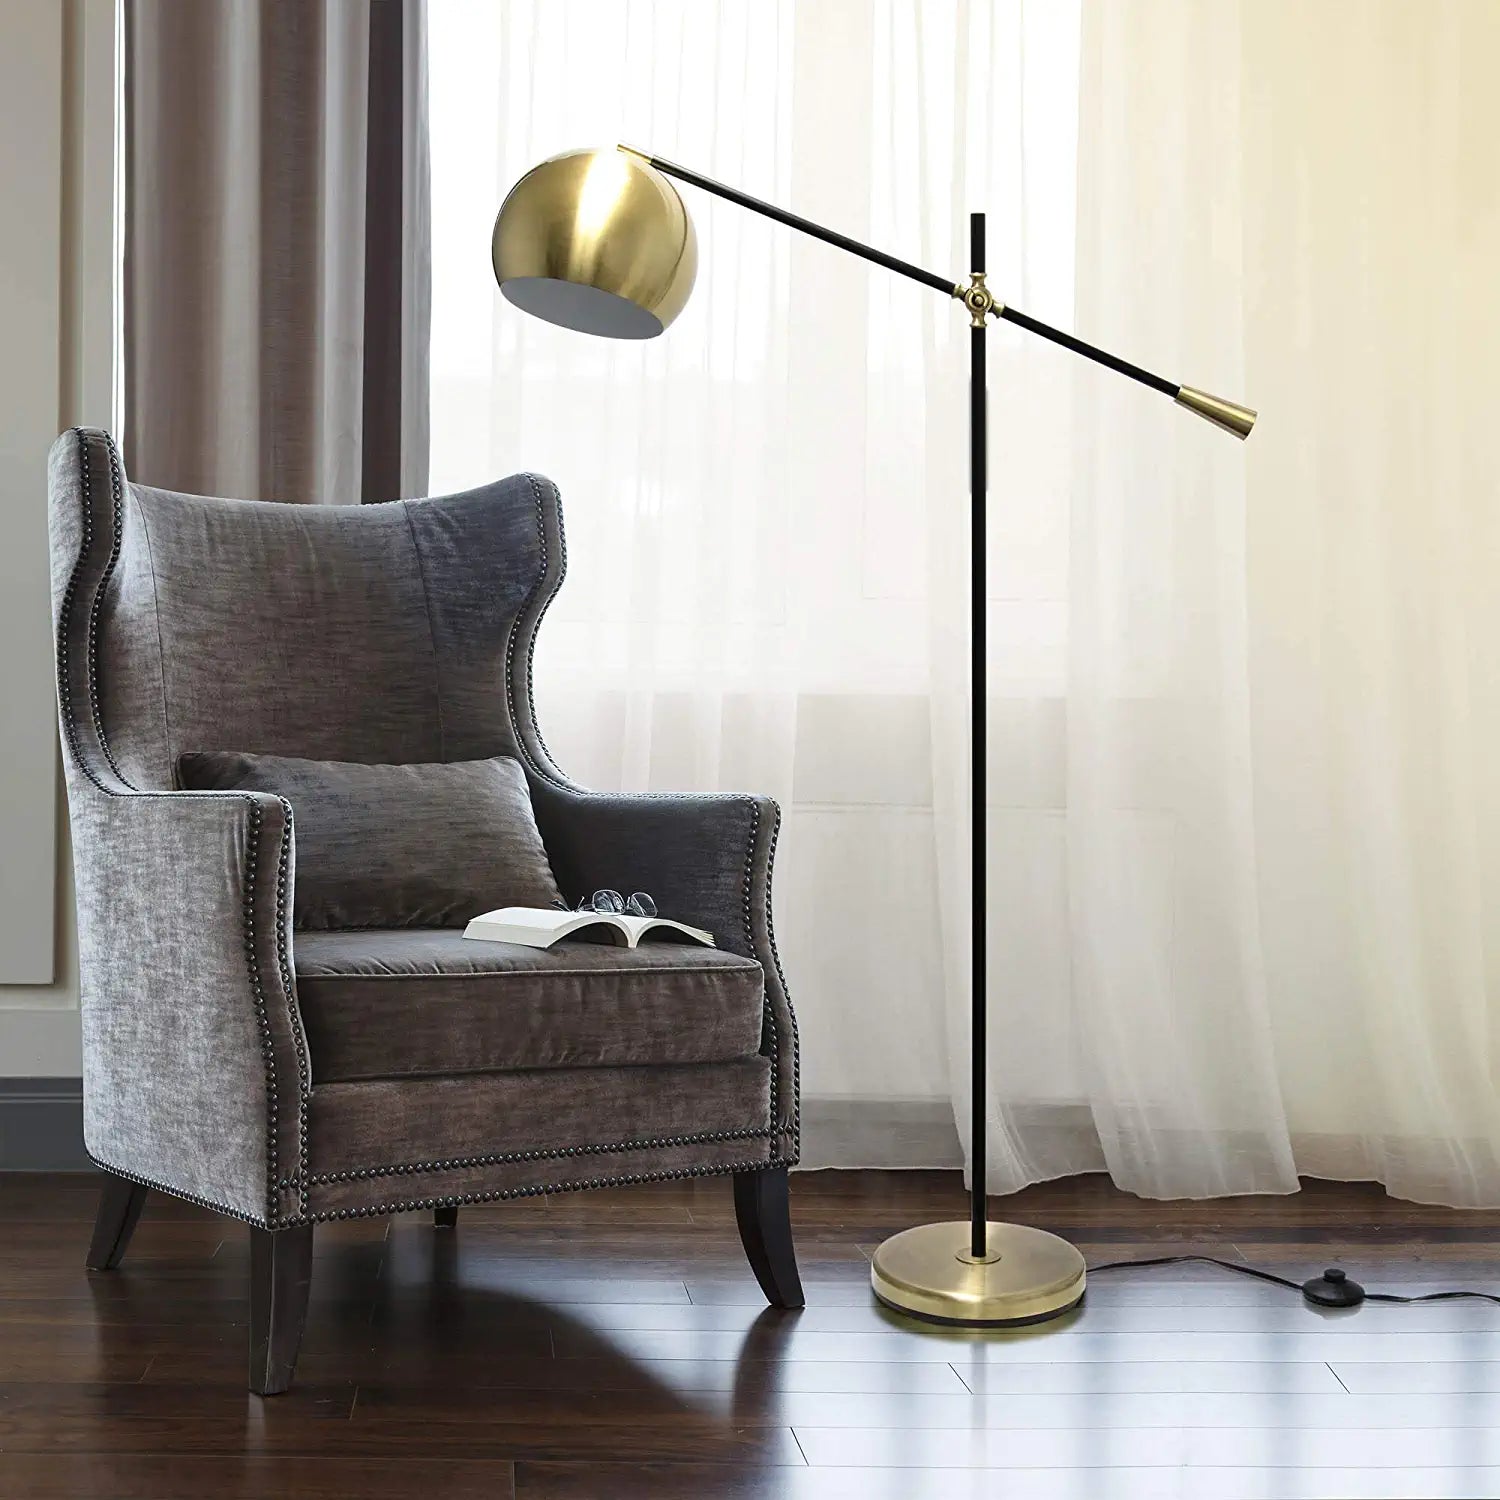 Lalia Home Decorative Black Matte Swivel Floor Lamp with Inner White Dome Shade, Antique Brass